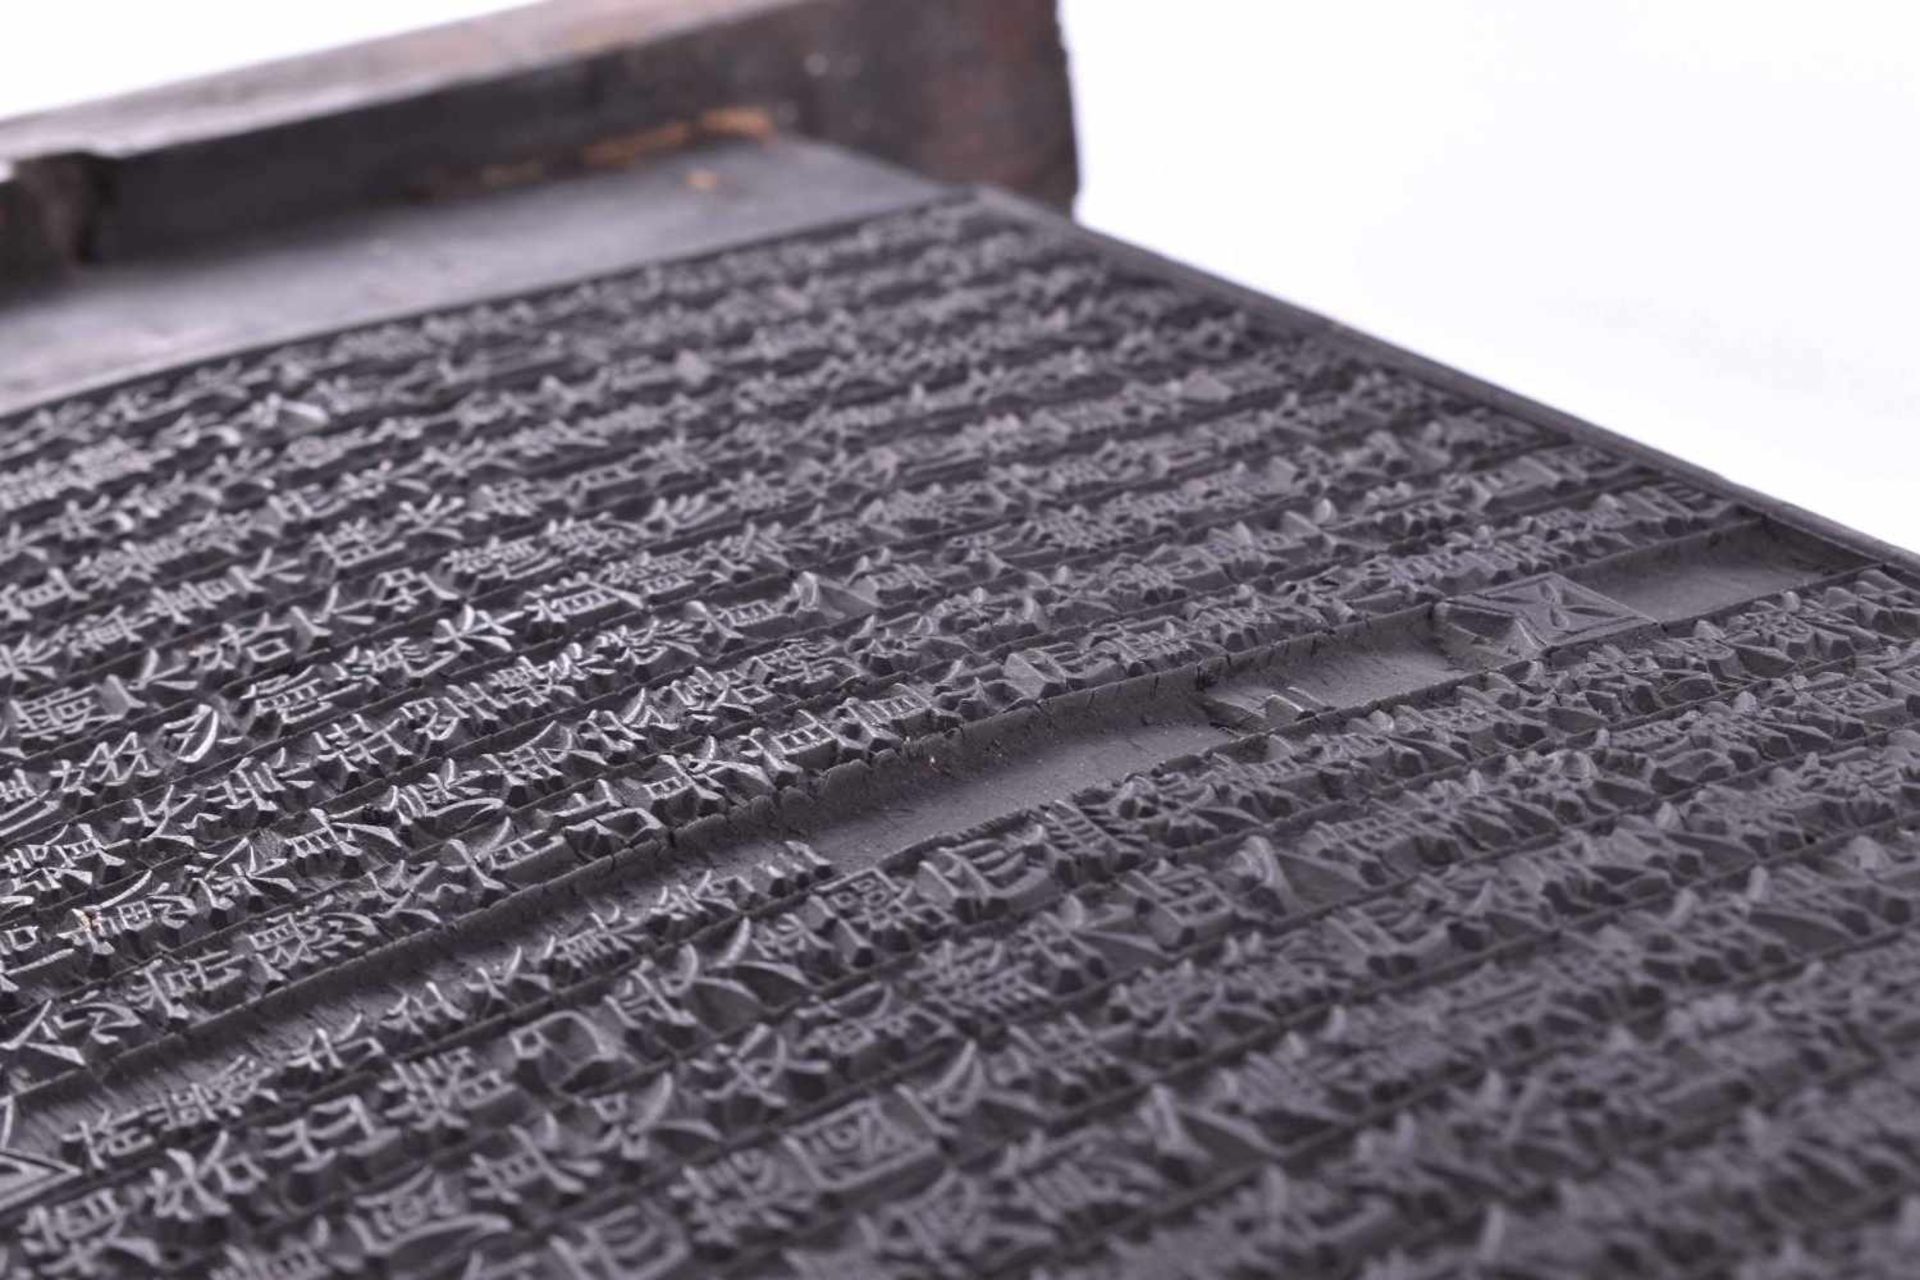 Printing plate China Qing Dynastywood, front- and backside with Chinese characters, 43.5 cm x 22.7 - Image 3 of 4